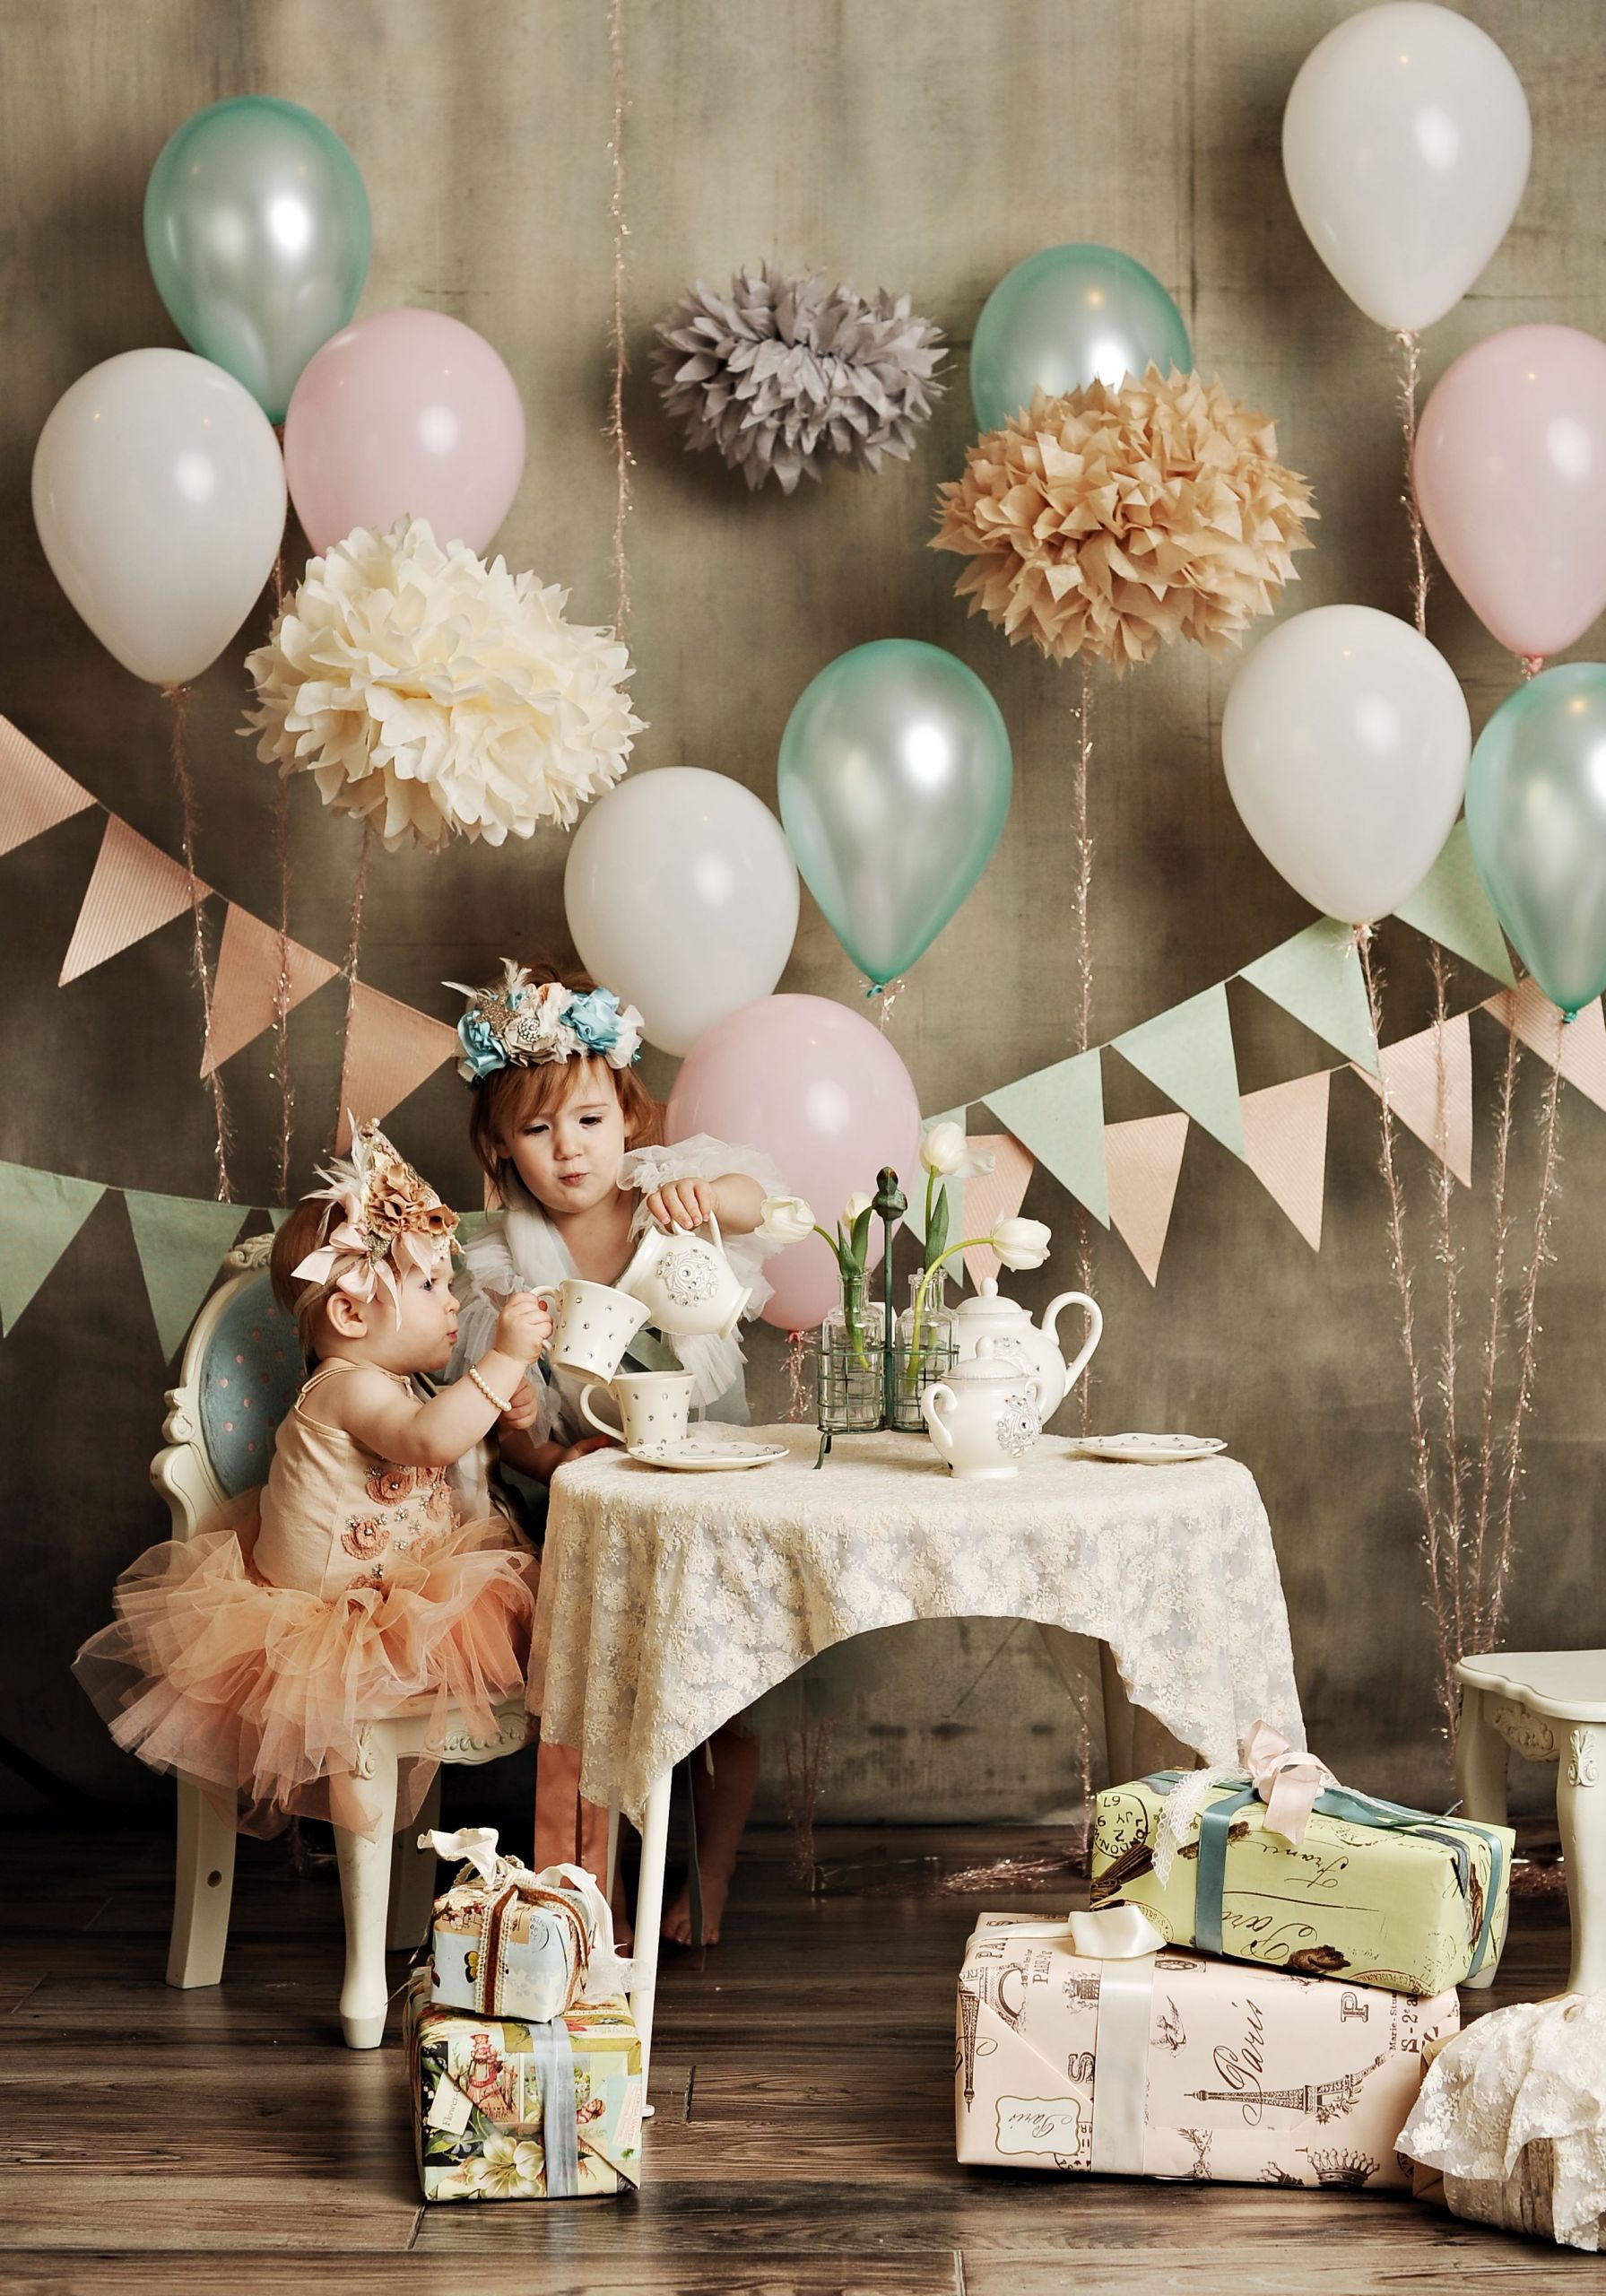 Tea Party Themed Birthday Party Ideas
 Gorgeous tea party set up Would work with baby girl and teddy bears or two little sister…